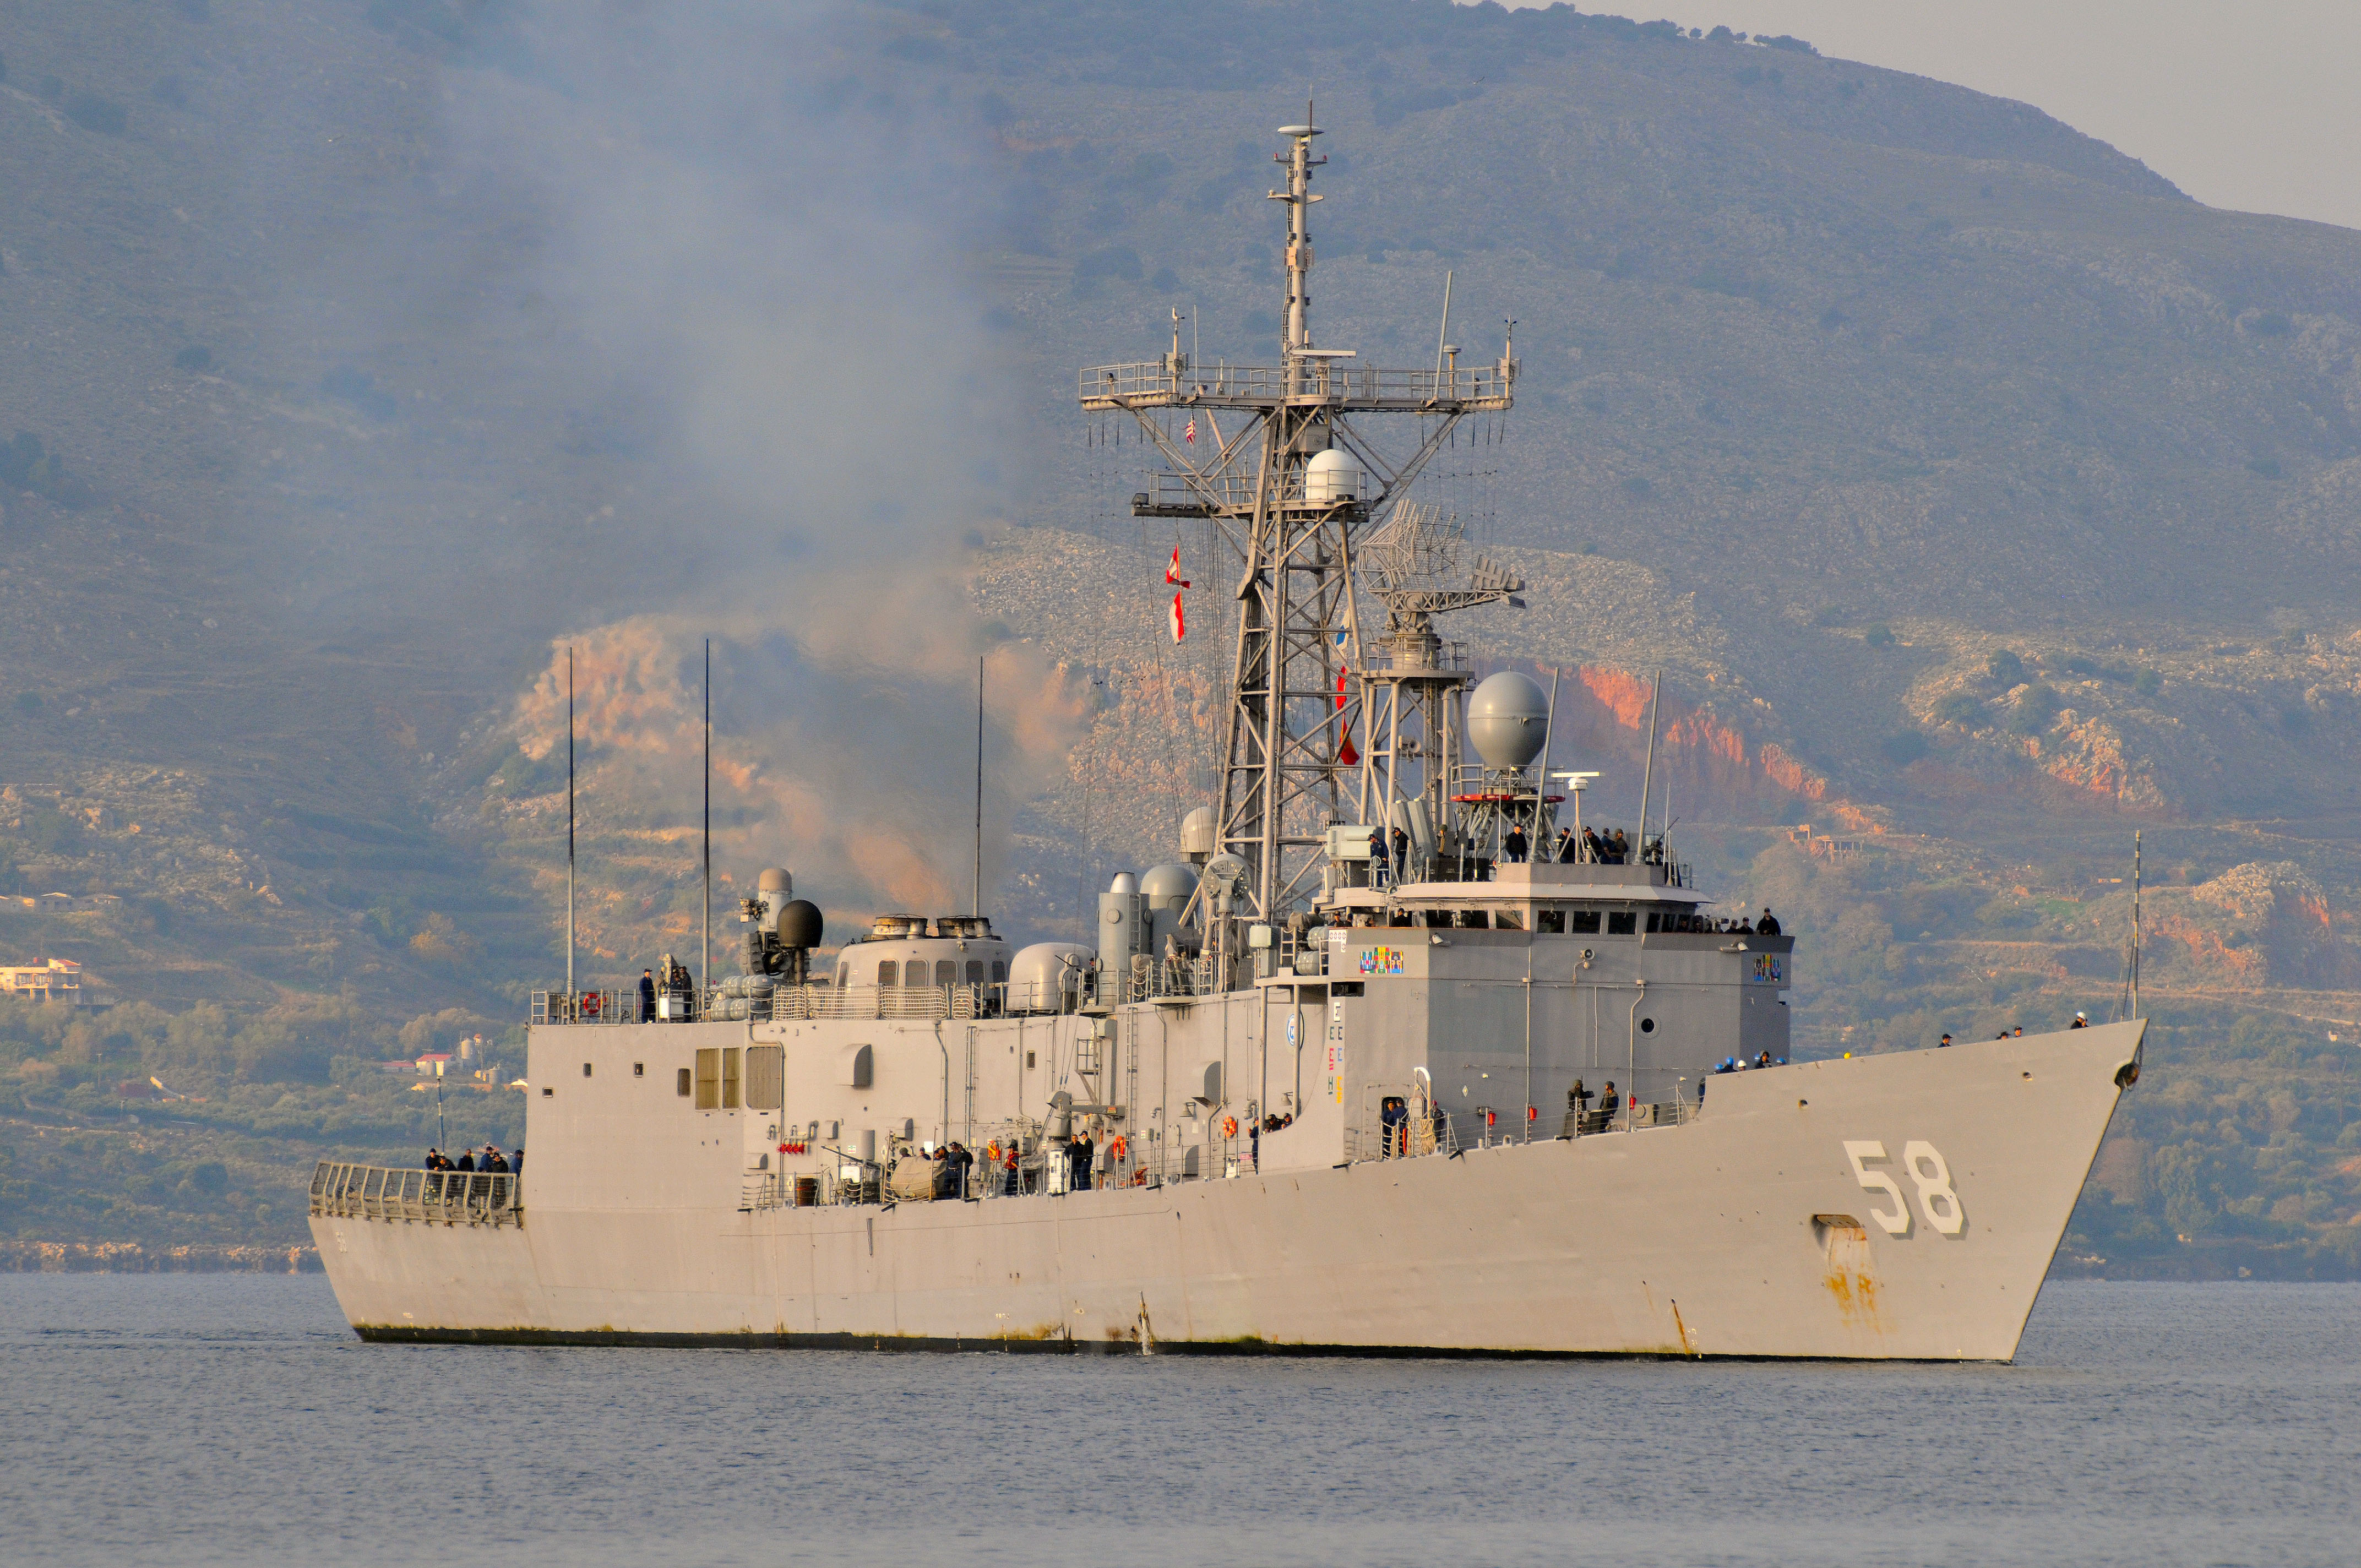 US_Navy_111123-N-MO201-046_The_guided-missile_frigate_USS_Samuel_B._Roberts_(FFG_58)_arrives_for_a_routine_port_visit_to_Crete.jpg